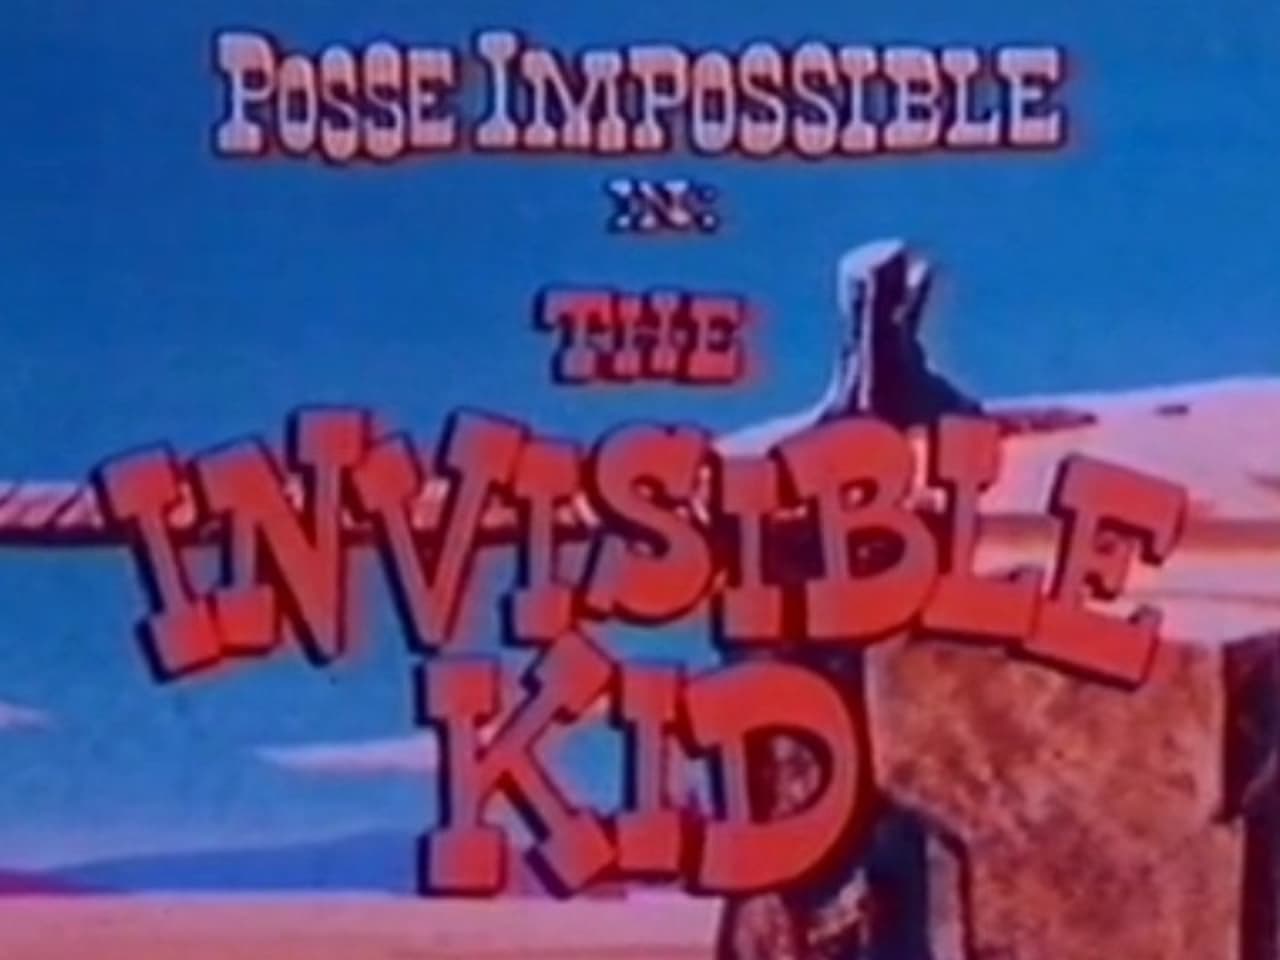 The Invisible Kid